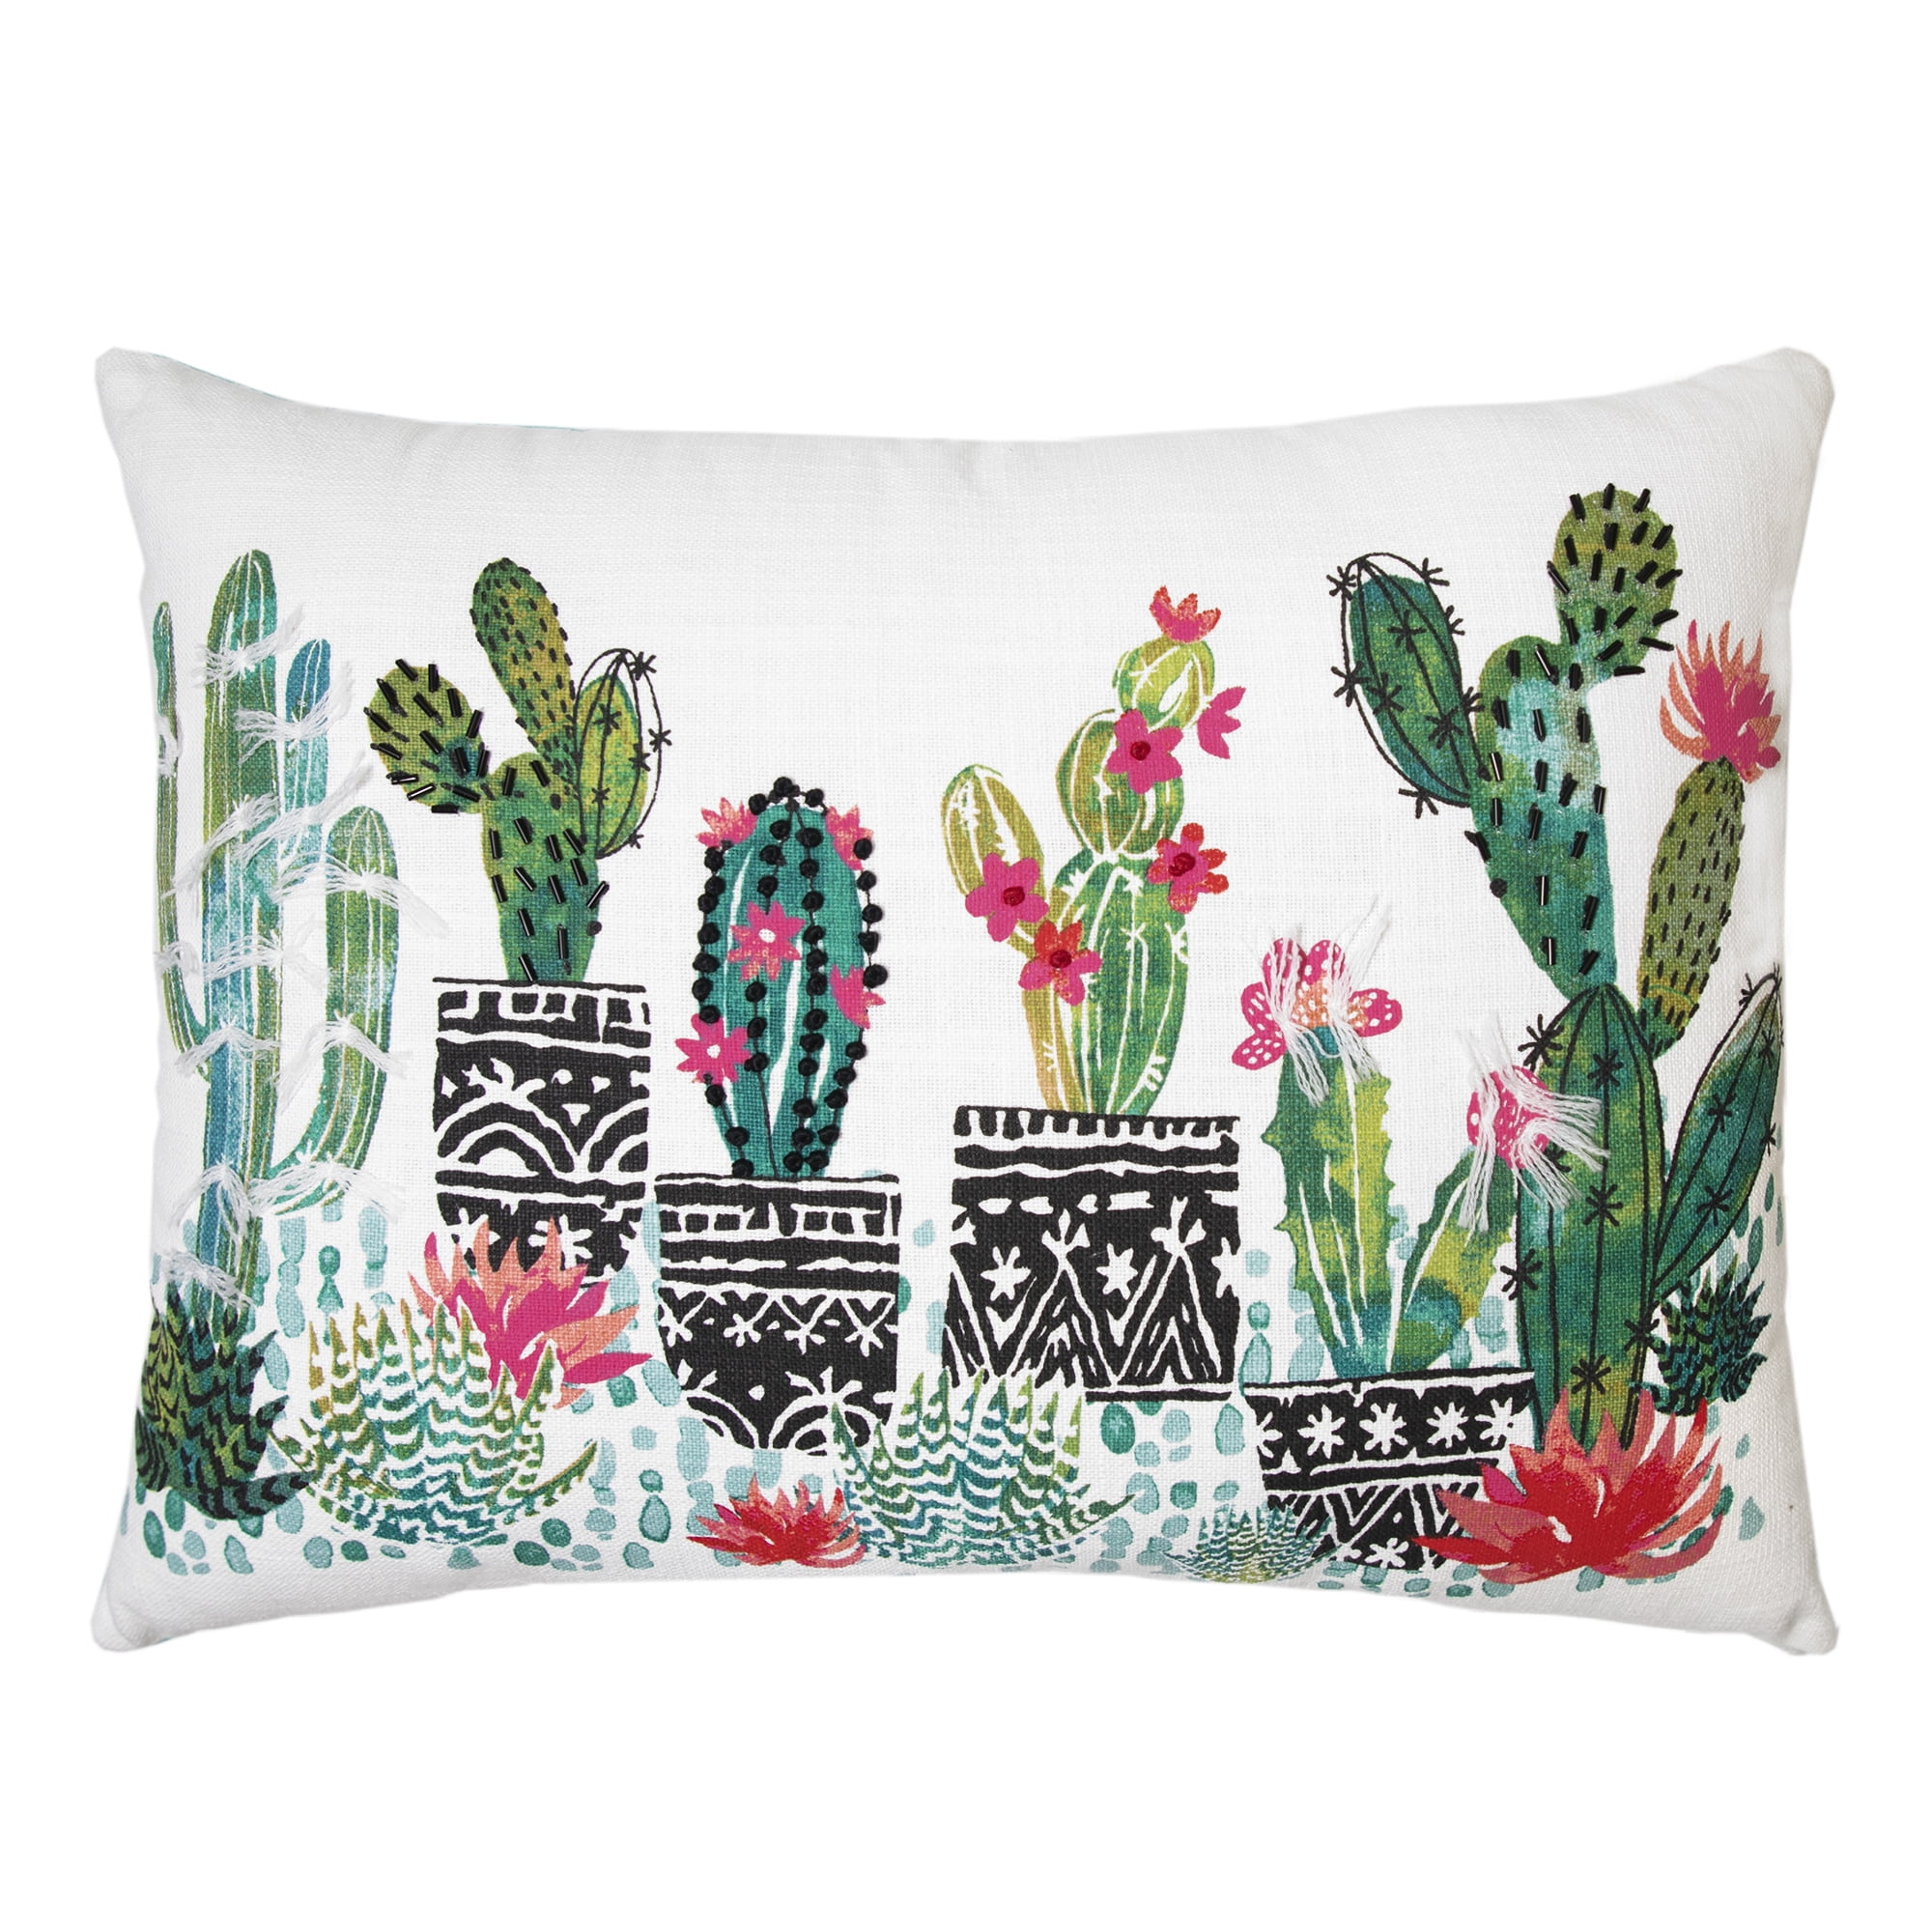 Watercolor Plant  Southwestern  18x18 Square Throw Pillow by Spoonflower Green Paddle Cactus  Rose by ivieclothco Cactus Throw Pillow